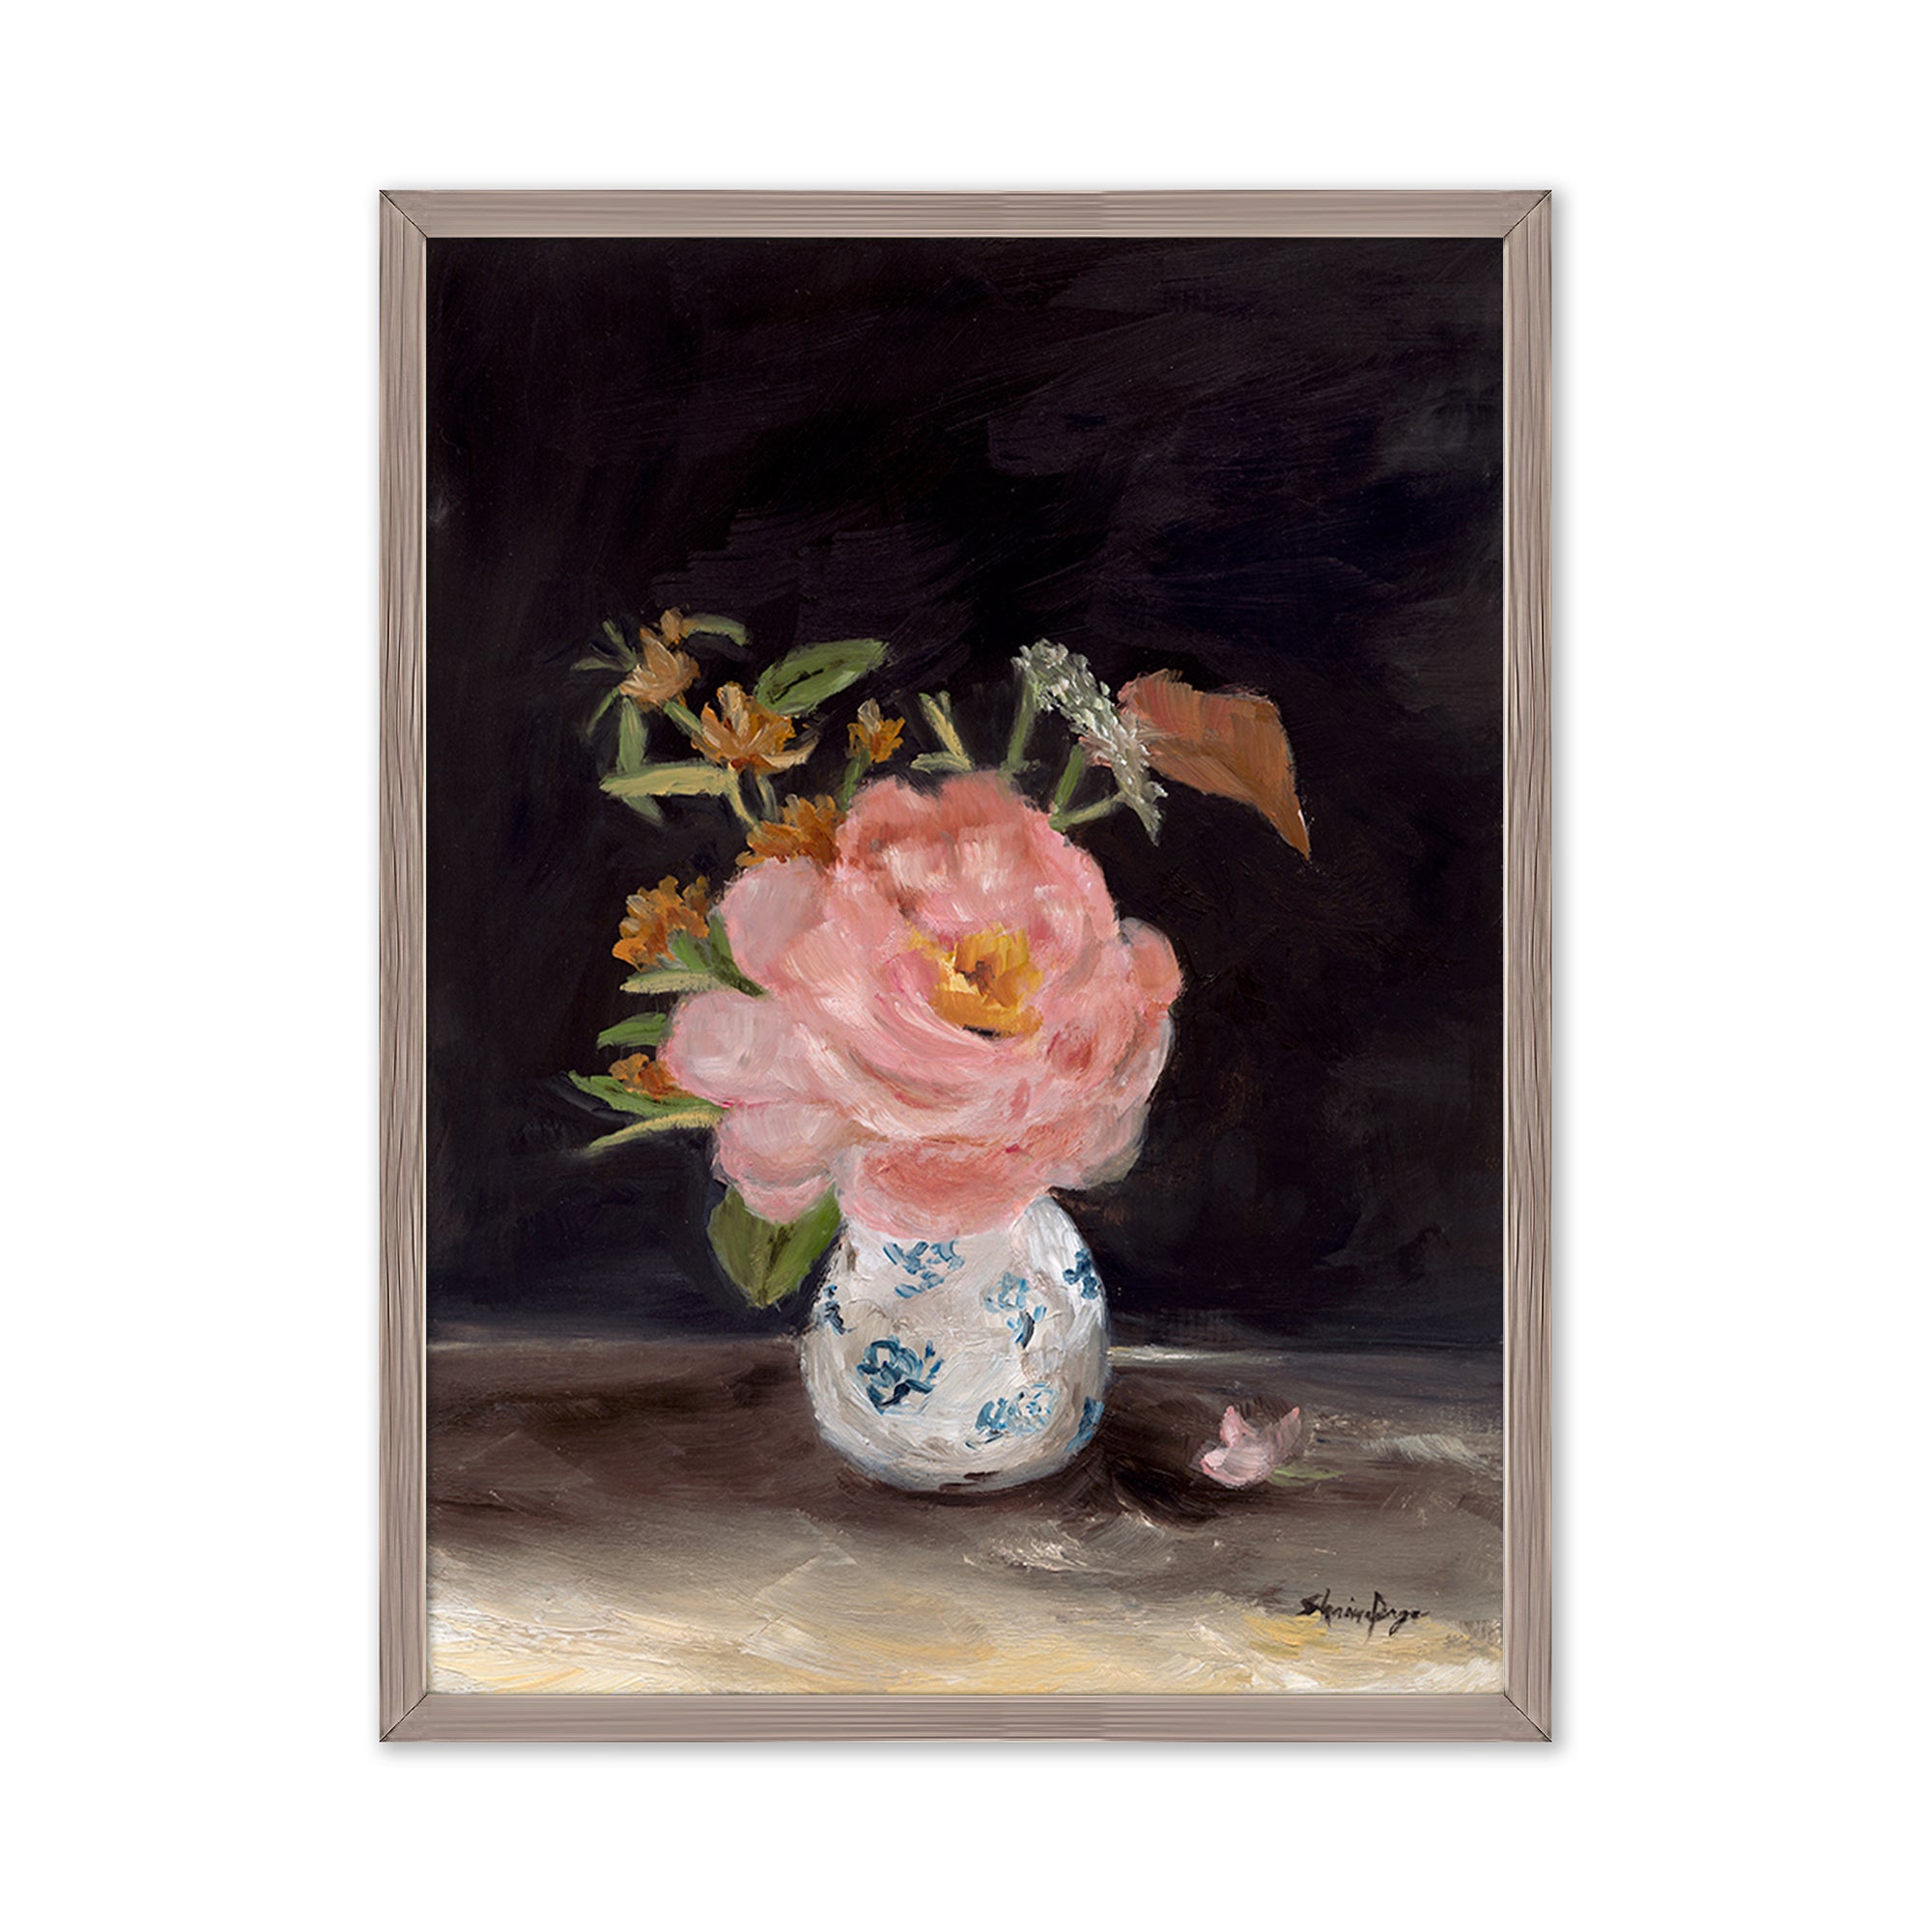 Framed wall art called Pink Peony by Shaina Page $428.00